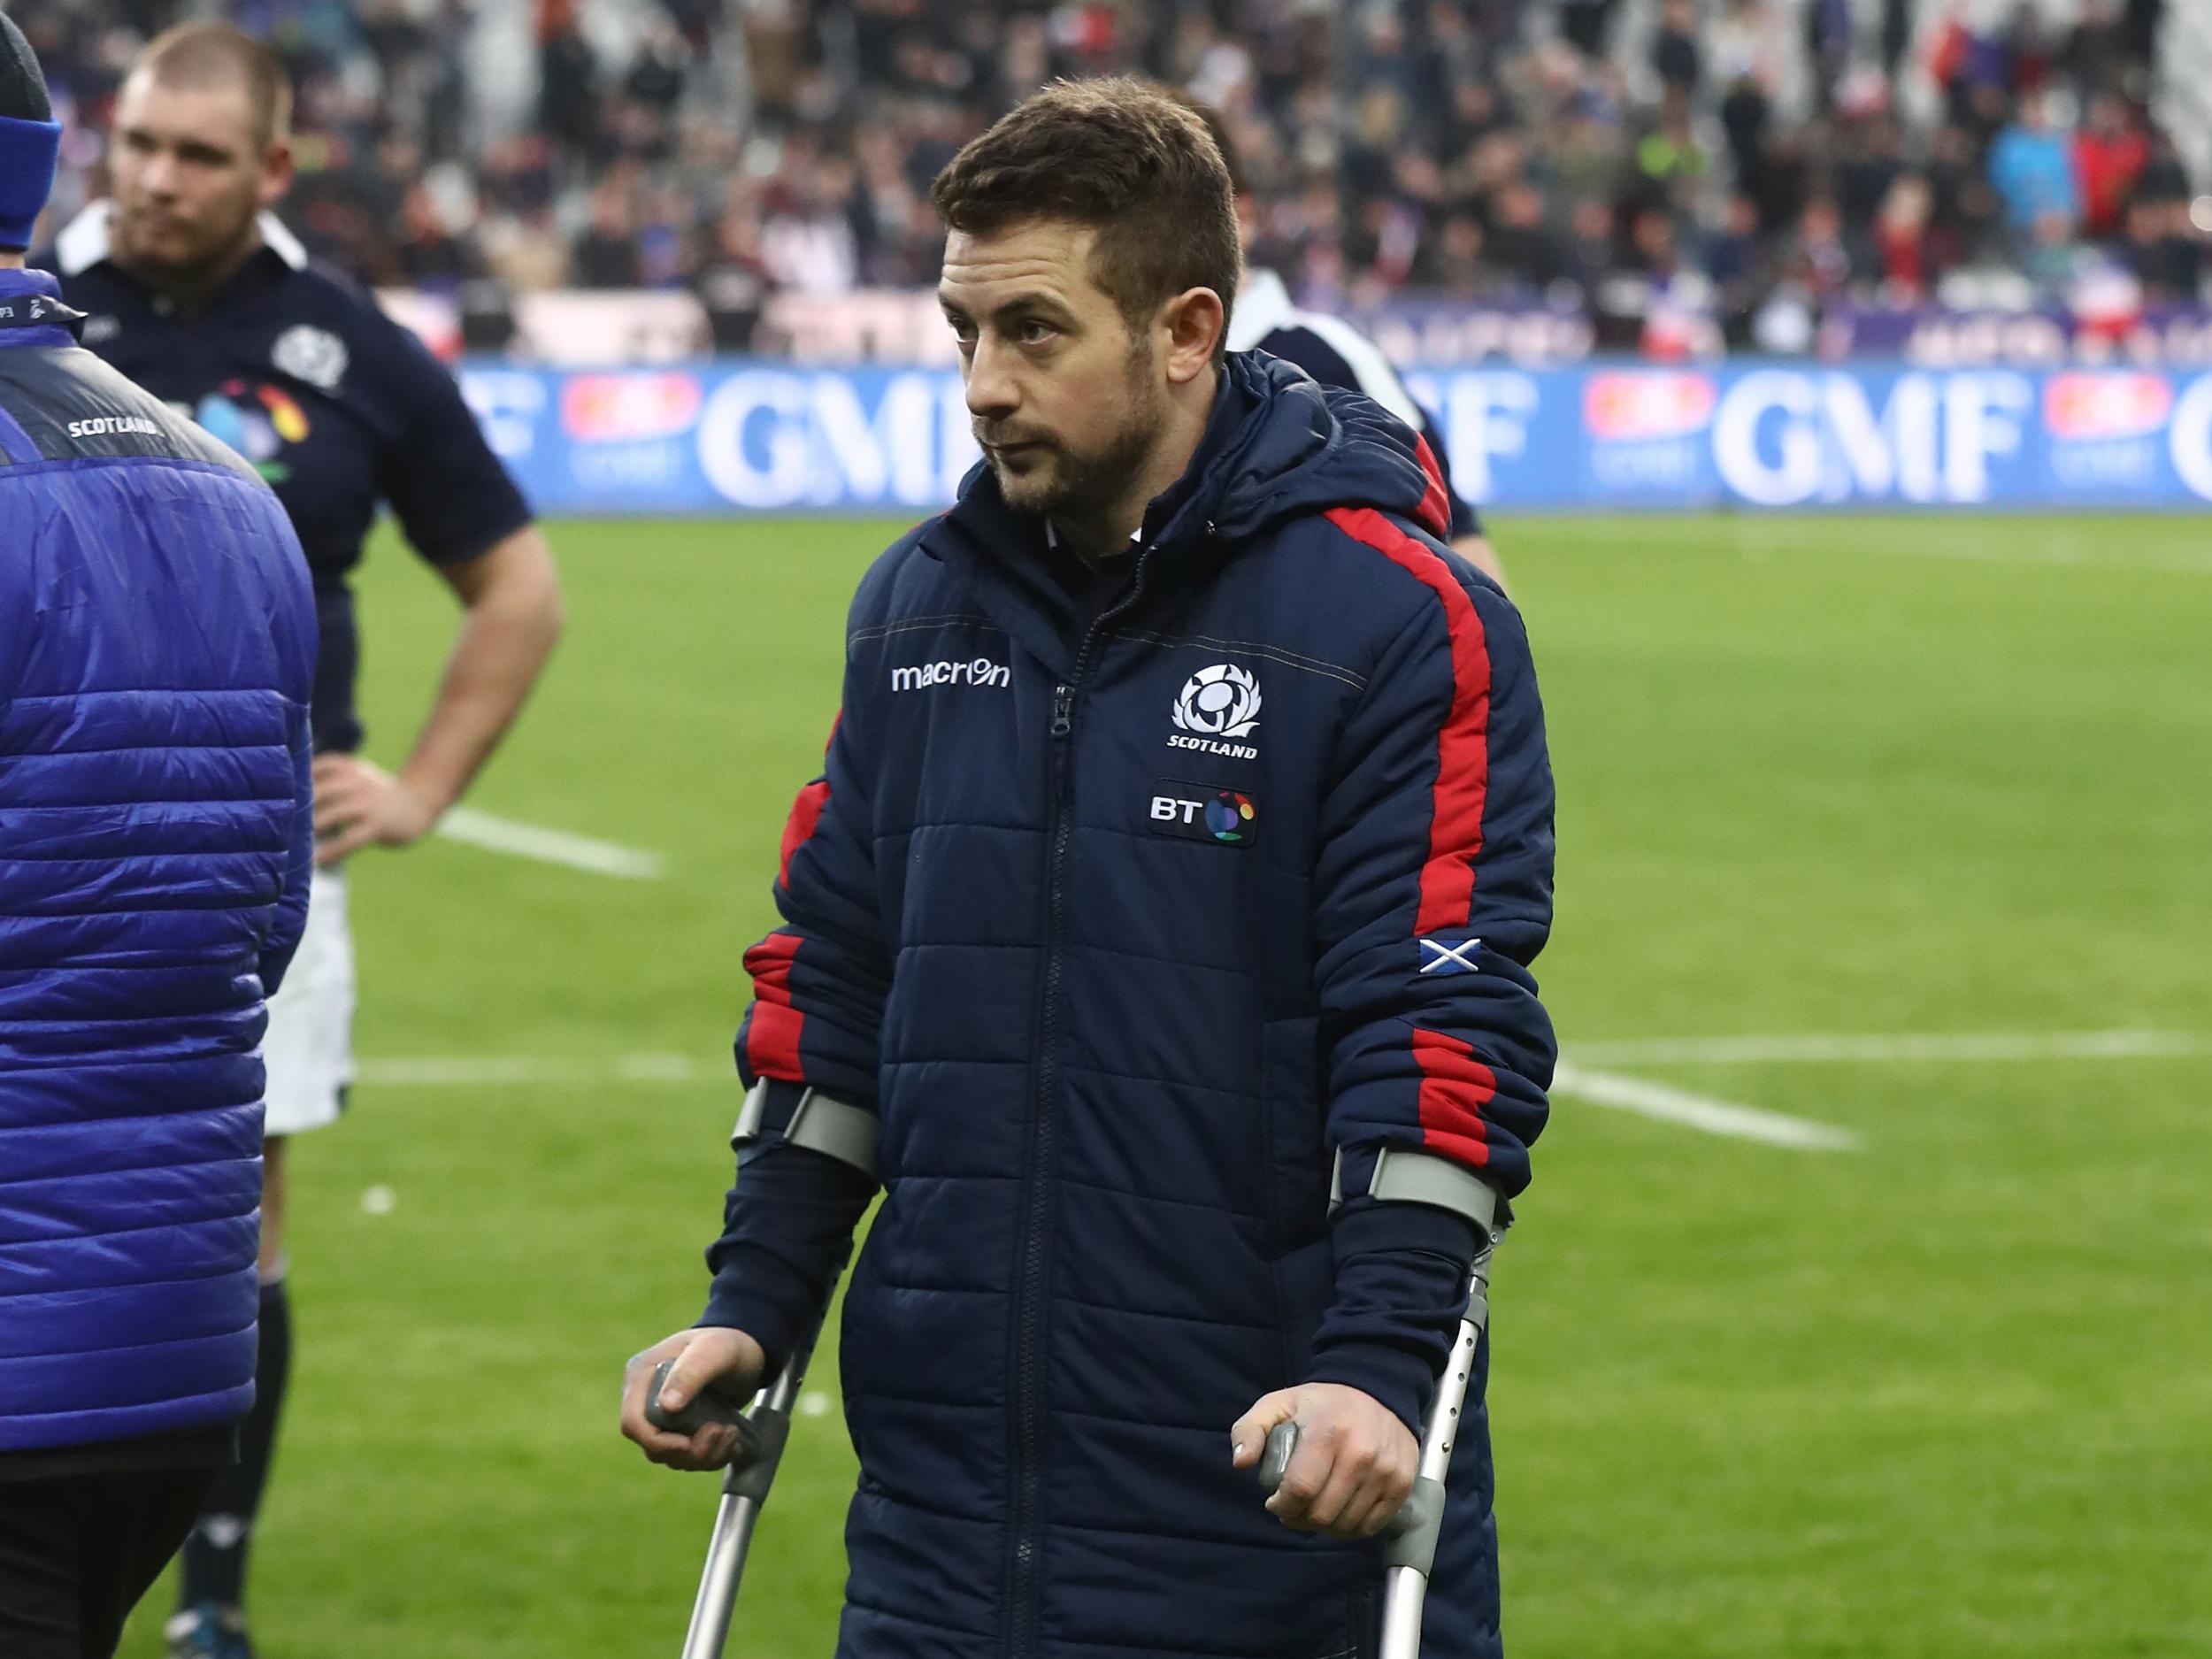 Greig Laidlaw left the Stade de France on crutches after Scotland's 22-16 defeat on Sunday